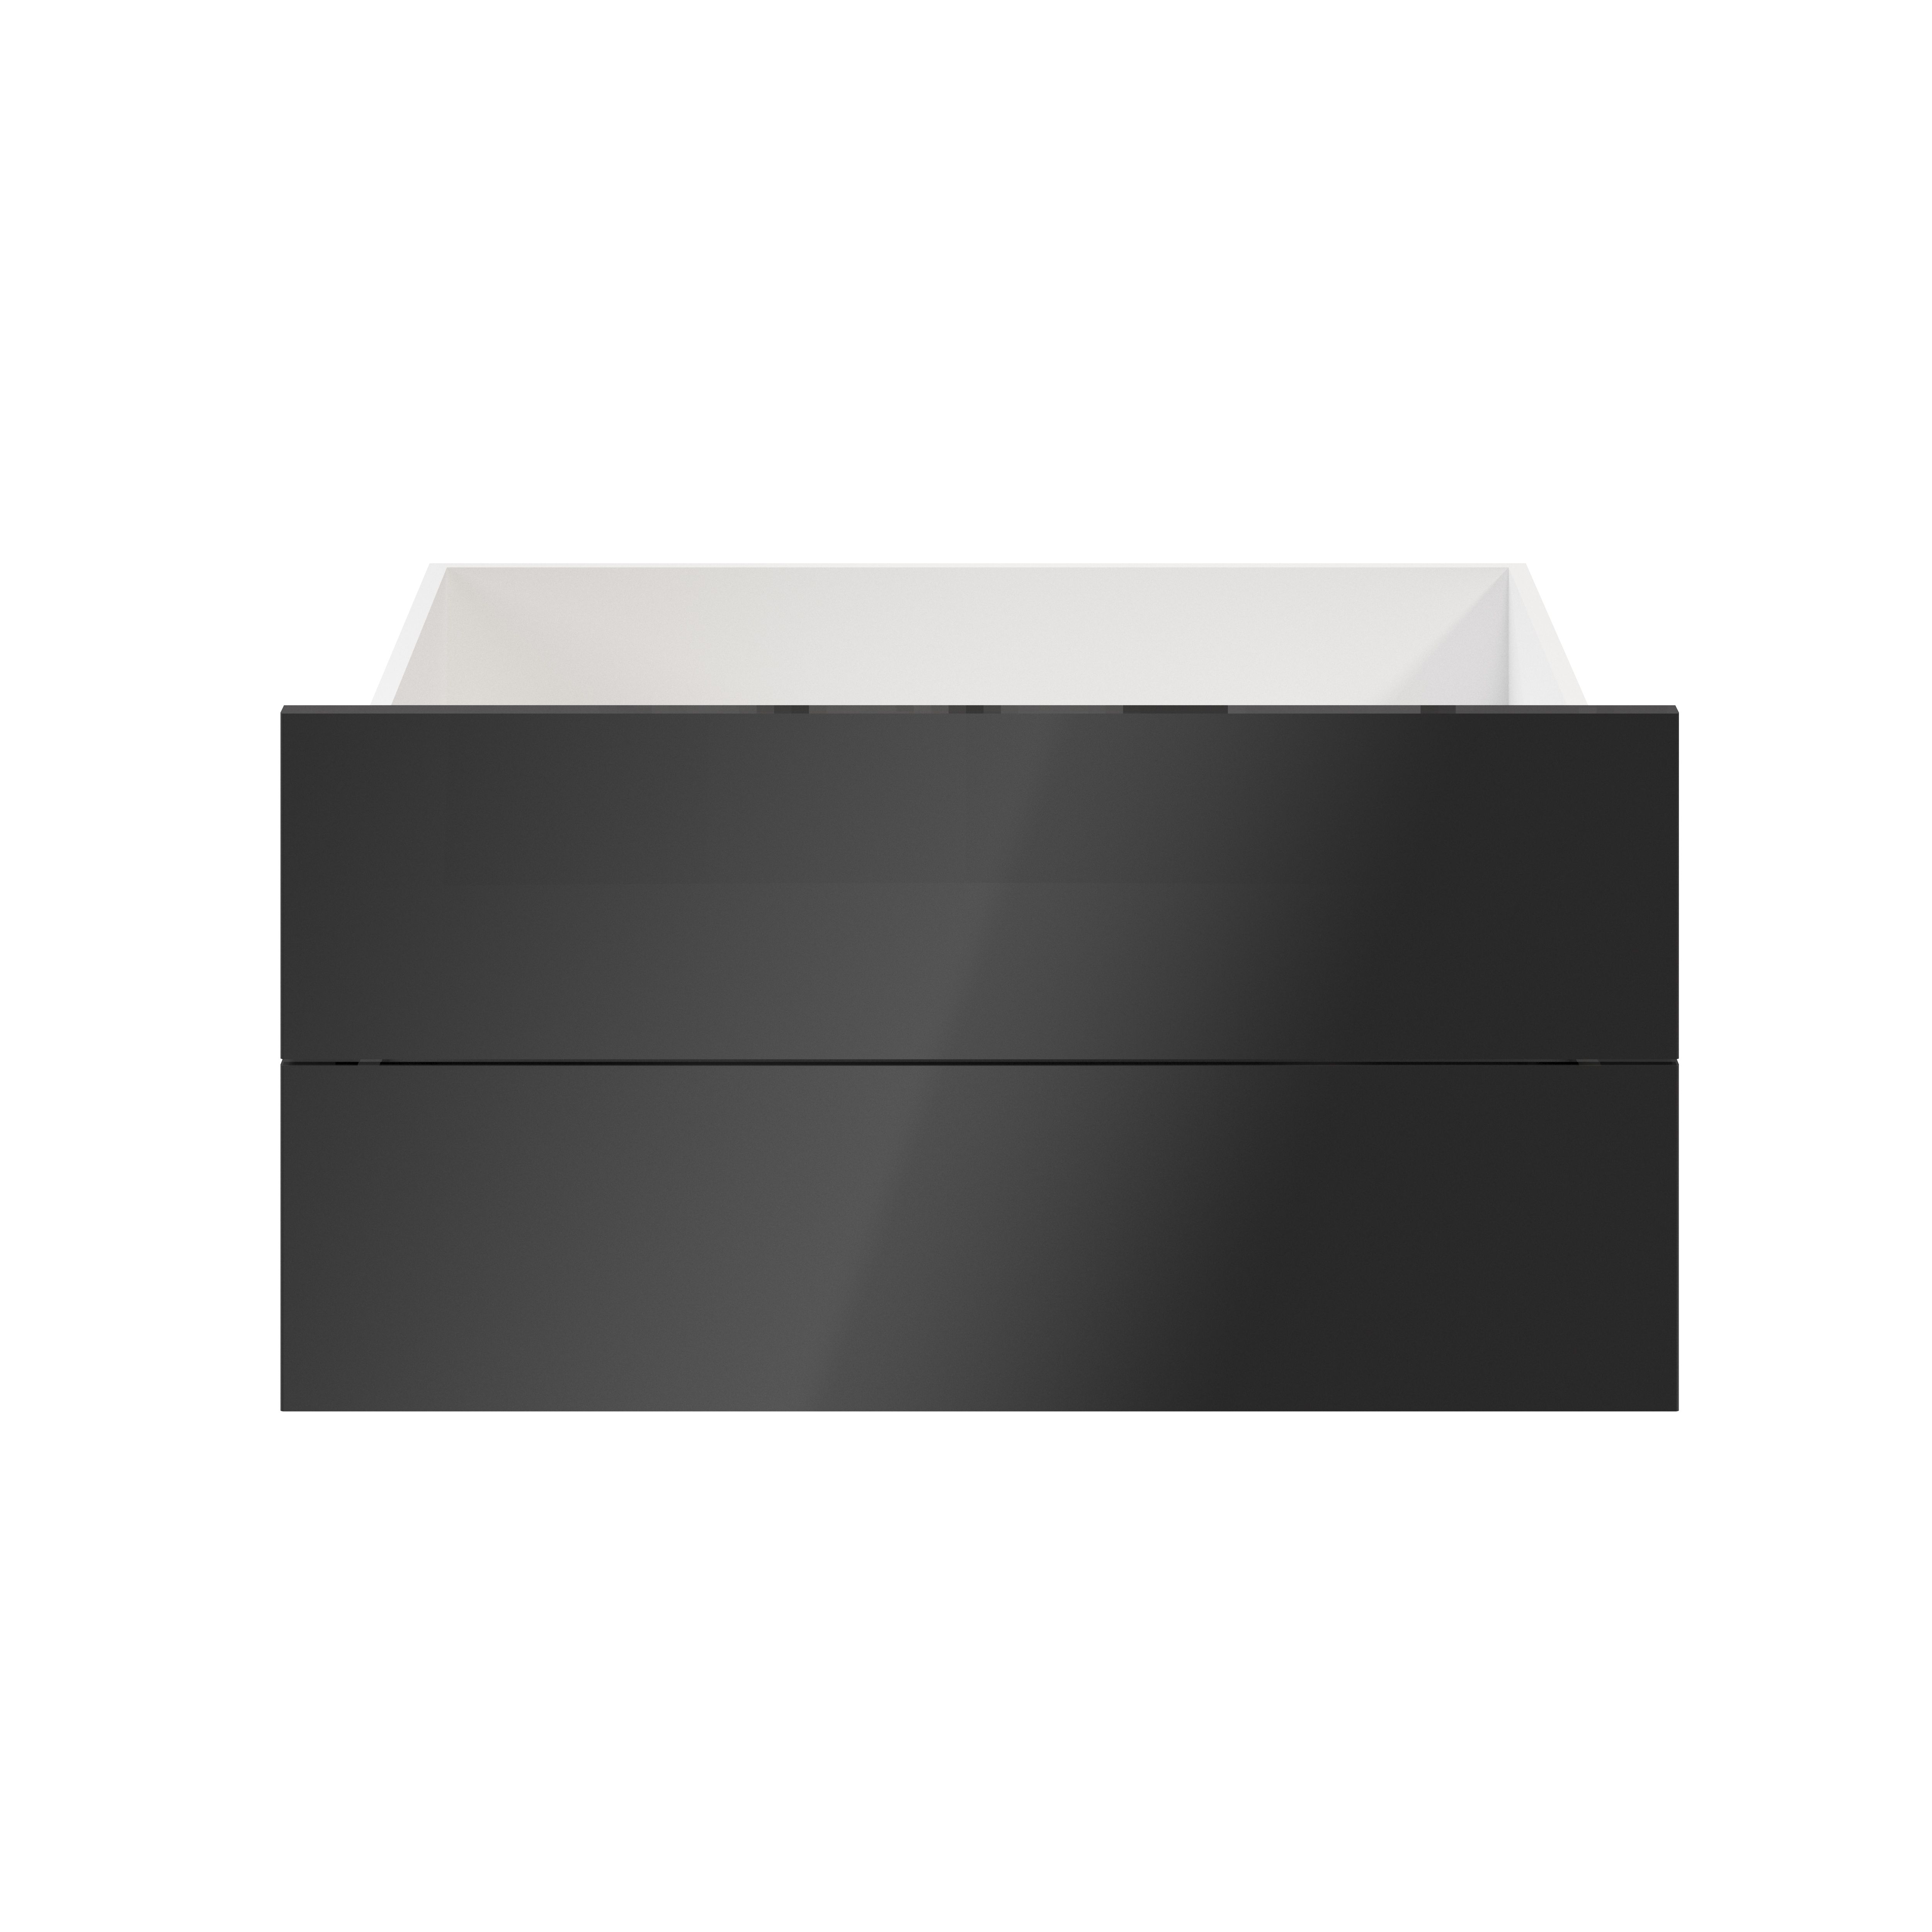 GoodHome Atomia Gloss anthracite Slab External Drawer (H)184.5mm (W)747mm (D)500mm, Set of 2